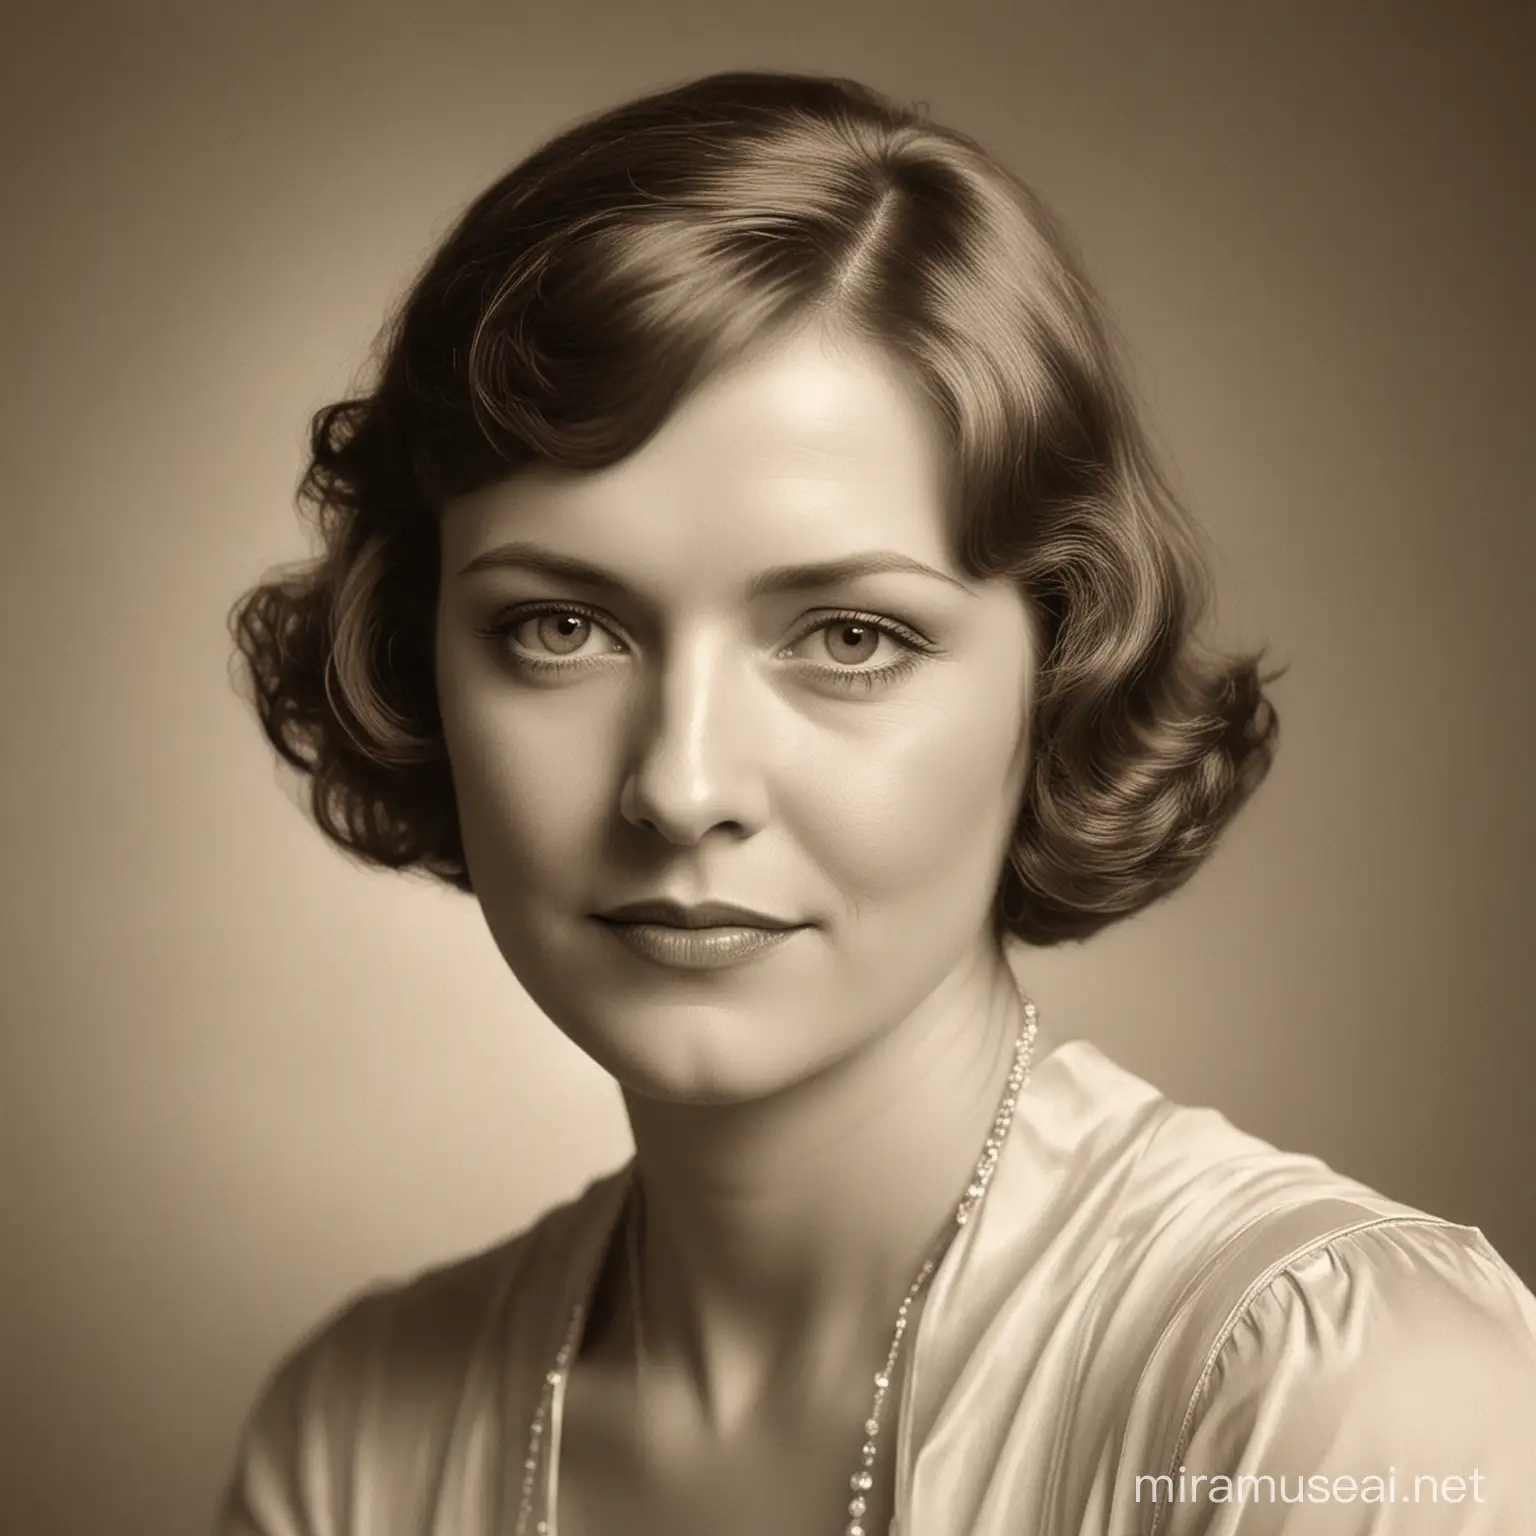 Barbara green-studer in a 1930’s style portrait